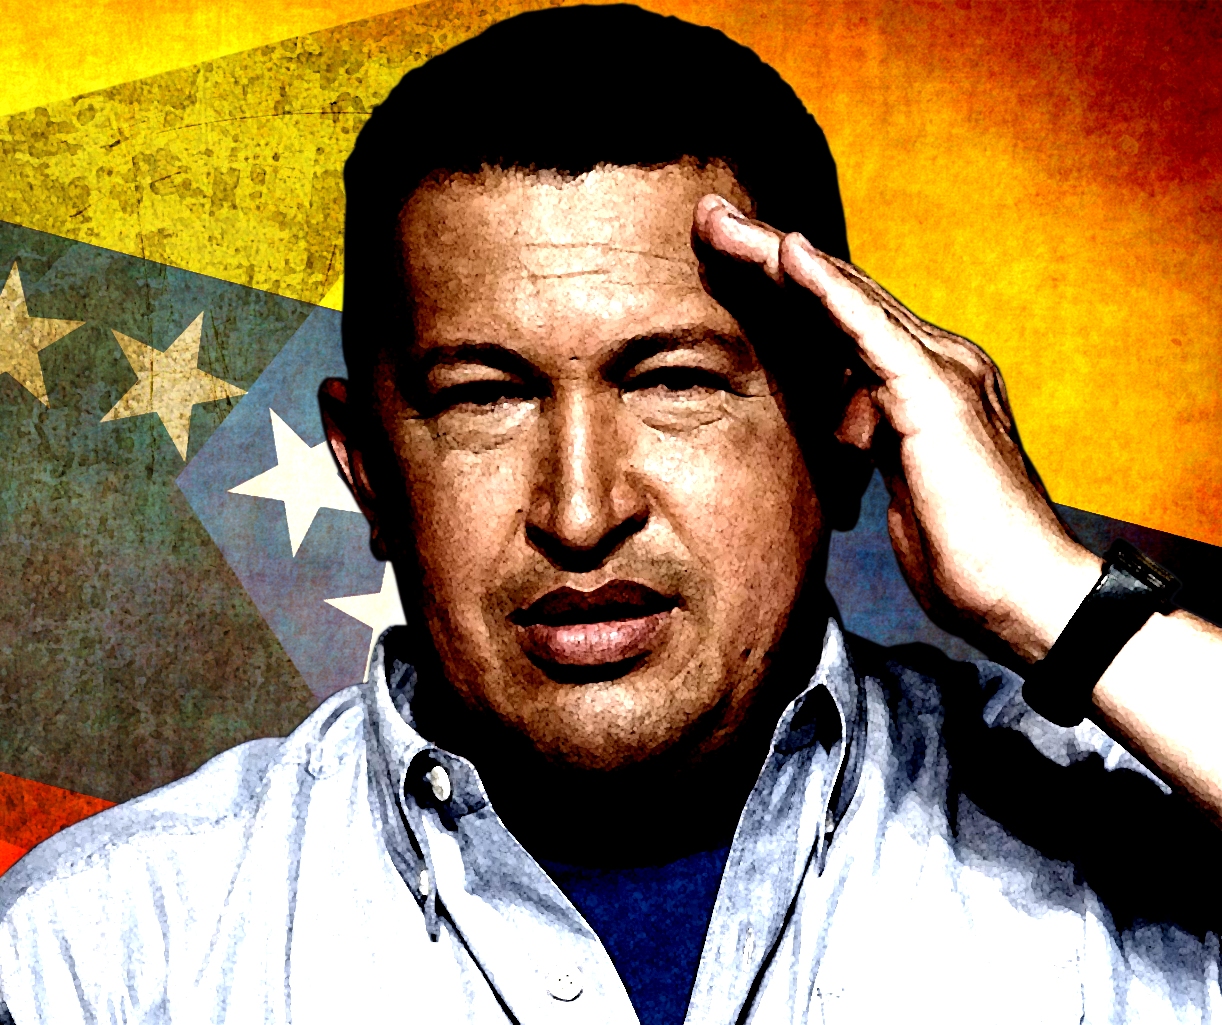 Hugo Chavez was a figure that had the neoliberals of the world worried. He led a democratic sweep of changes across his country, appropriating businesses, ... - hugo_chavez_by_drunah-d5x66cl